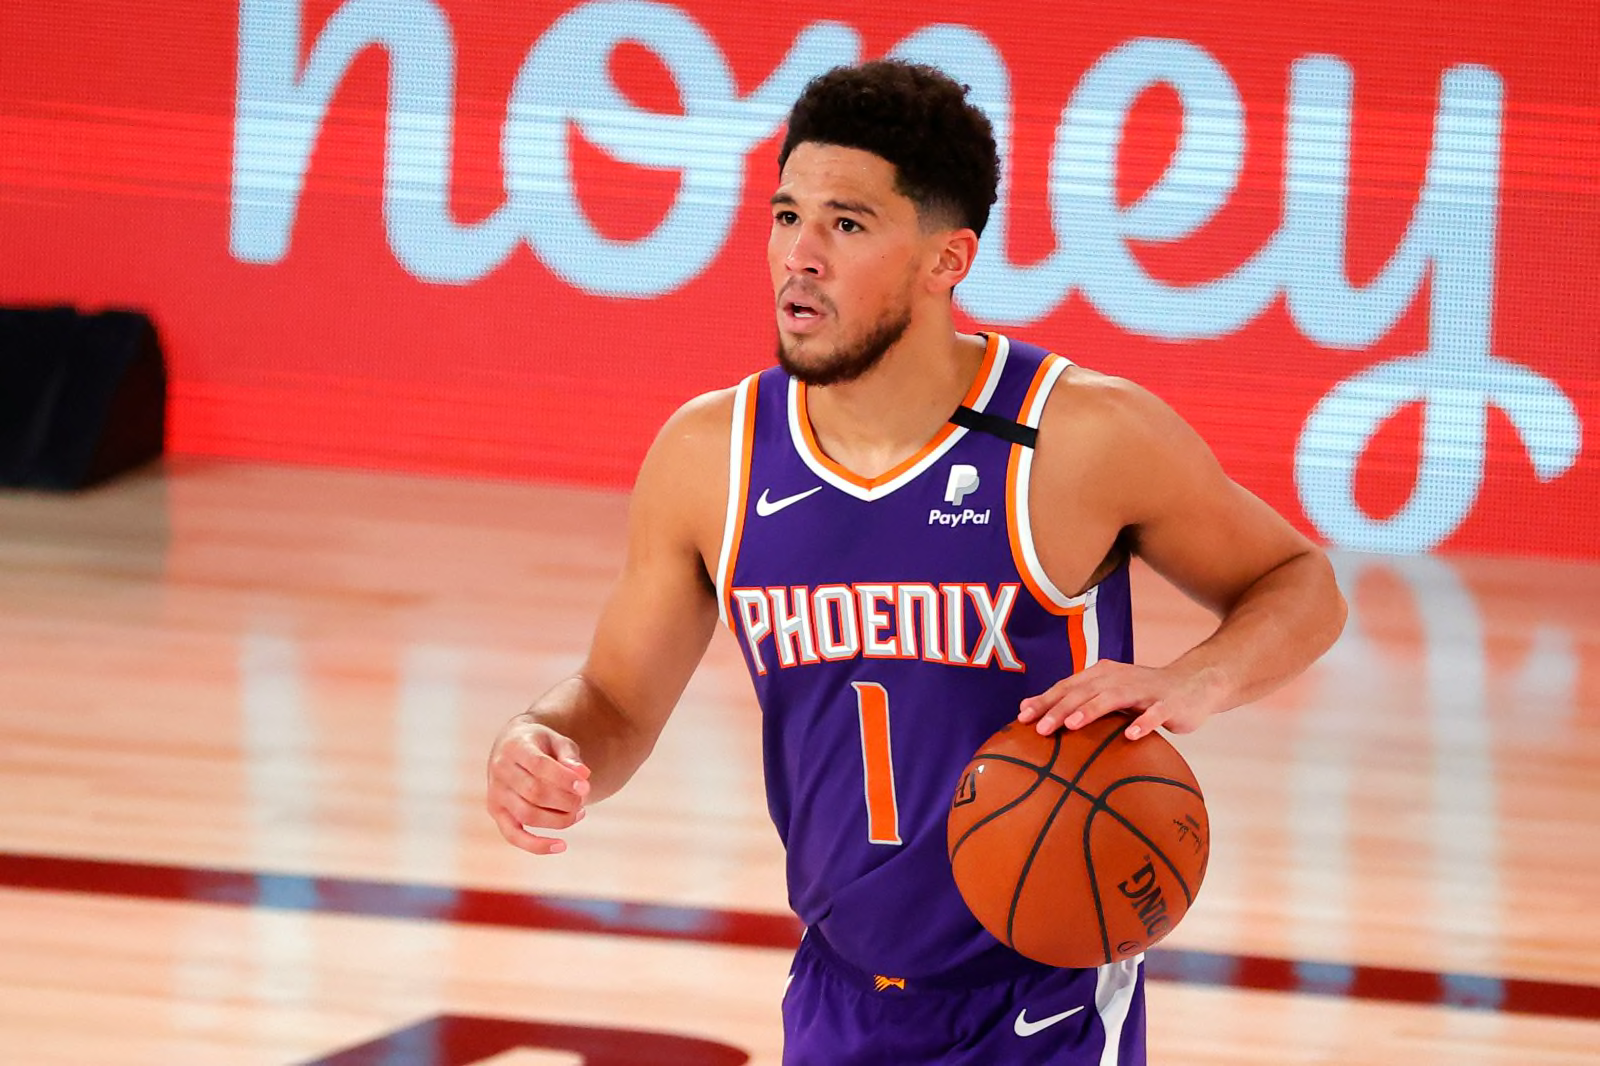 Phoenix Suns: How can Devin Booker become an all-time great player? - Page 2